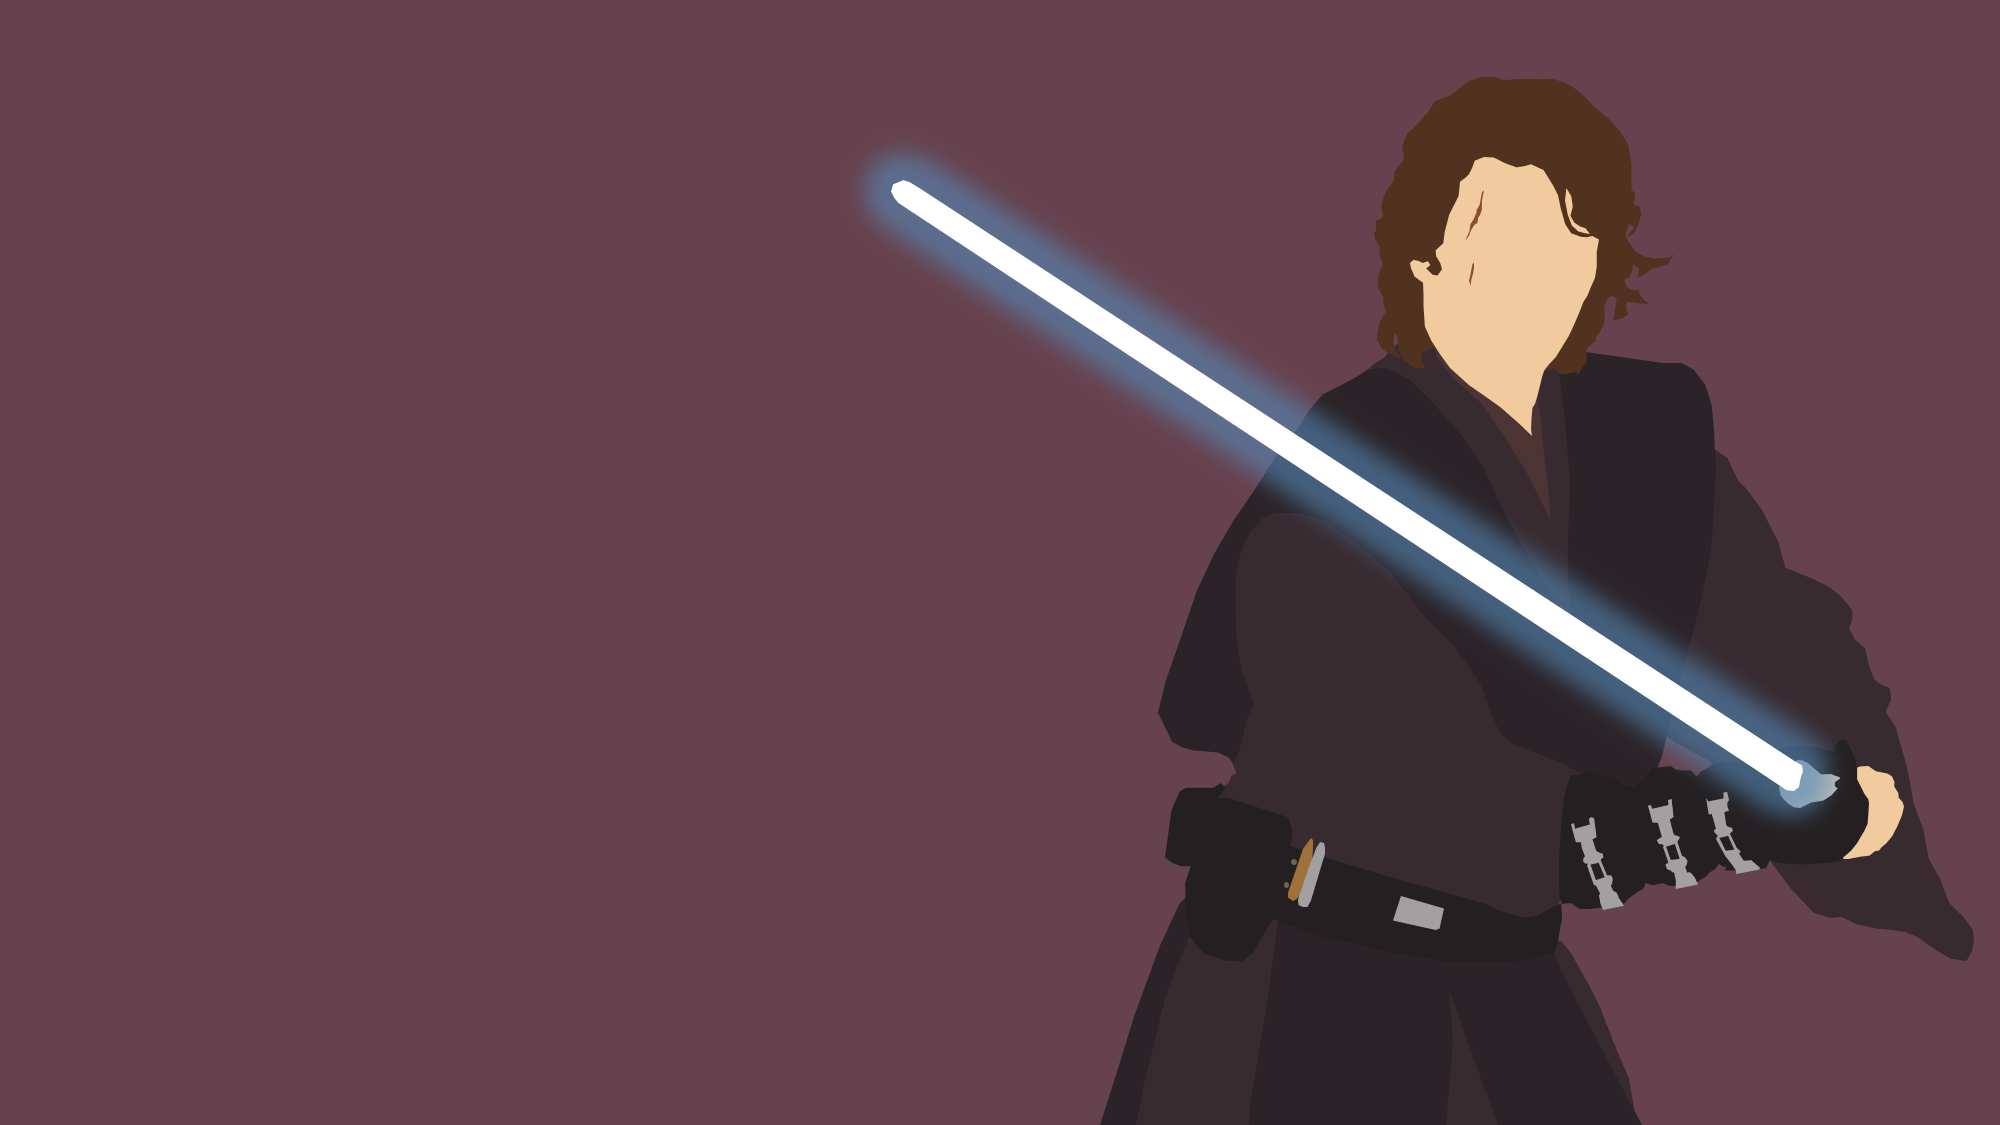 Movie Star Wars Episode III: Revenge of the Sith HD Wallpaper | Background Image